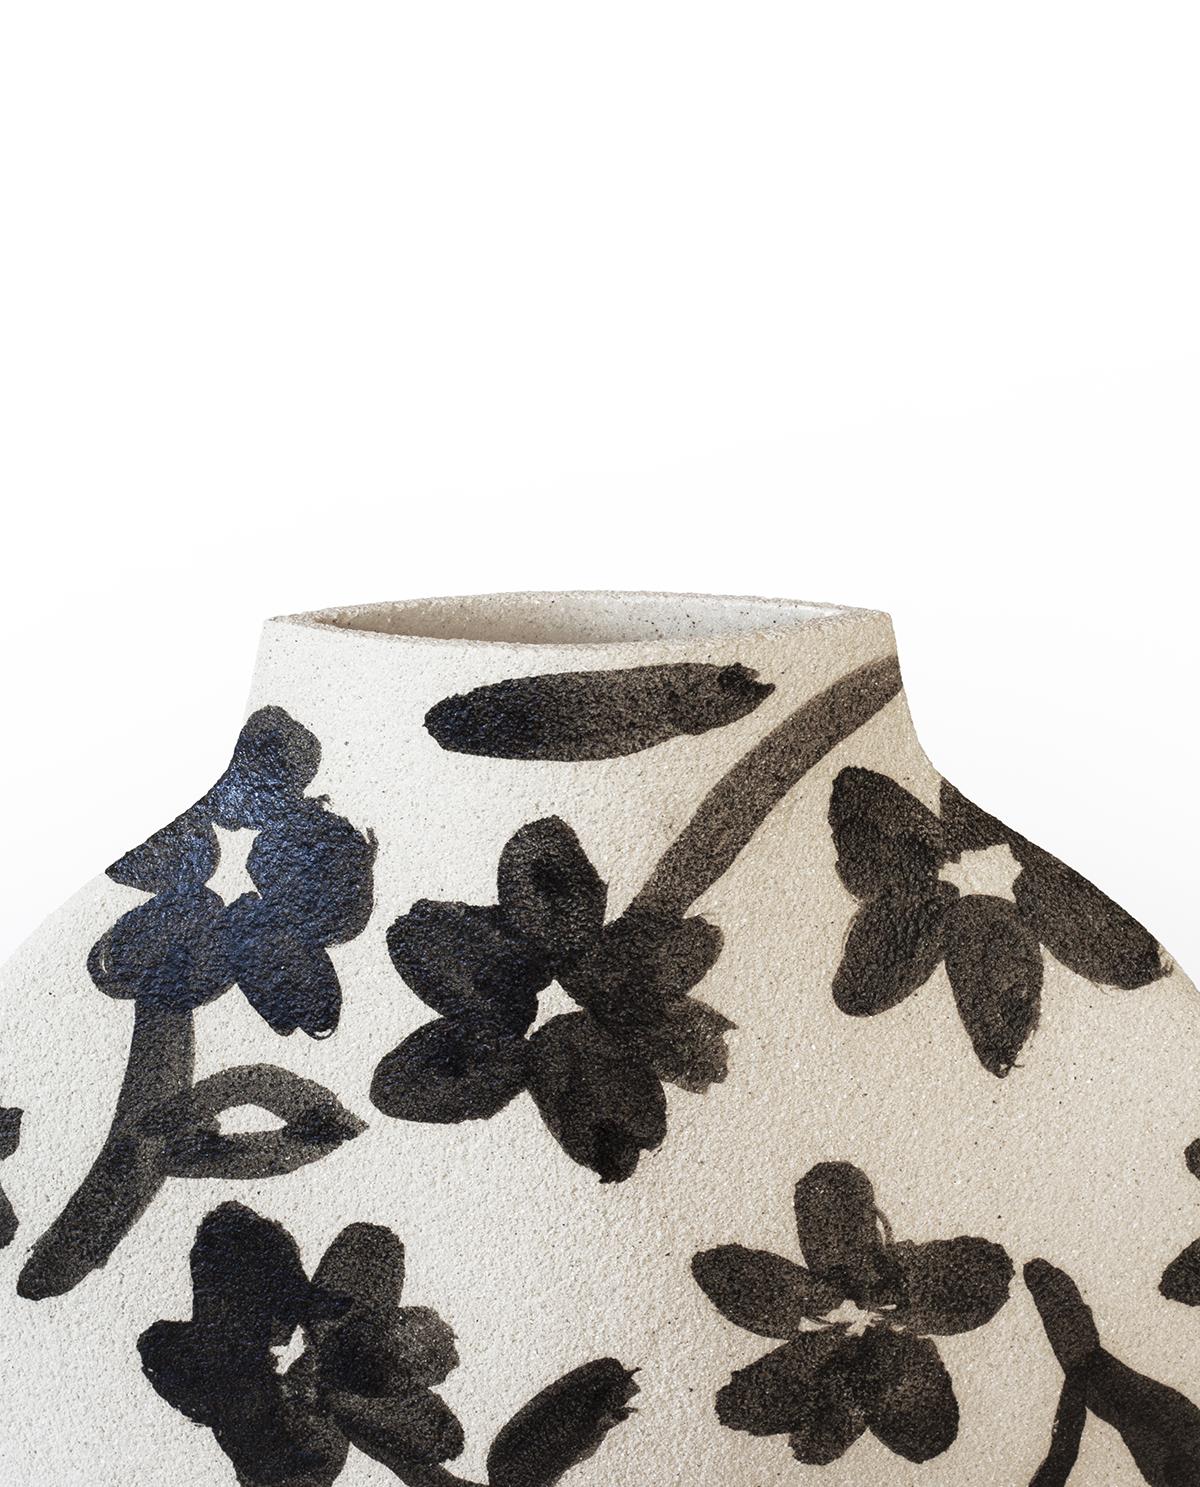 Minimalist 21st Century 'Flowers Pattern' Vase in White Ceramic, Hand-Crafted in France For Sale